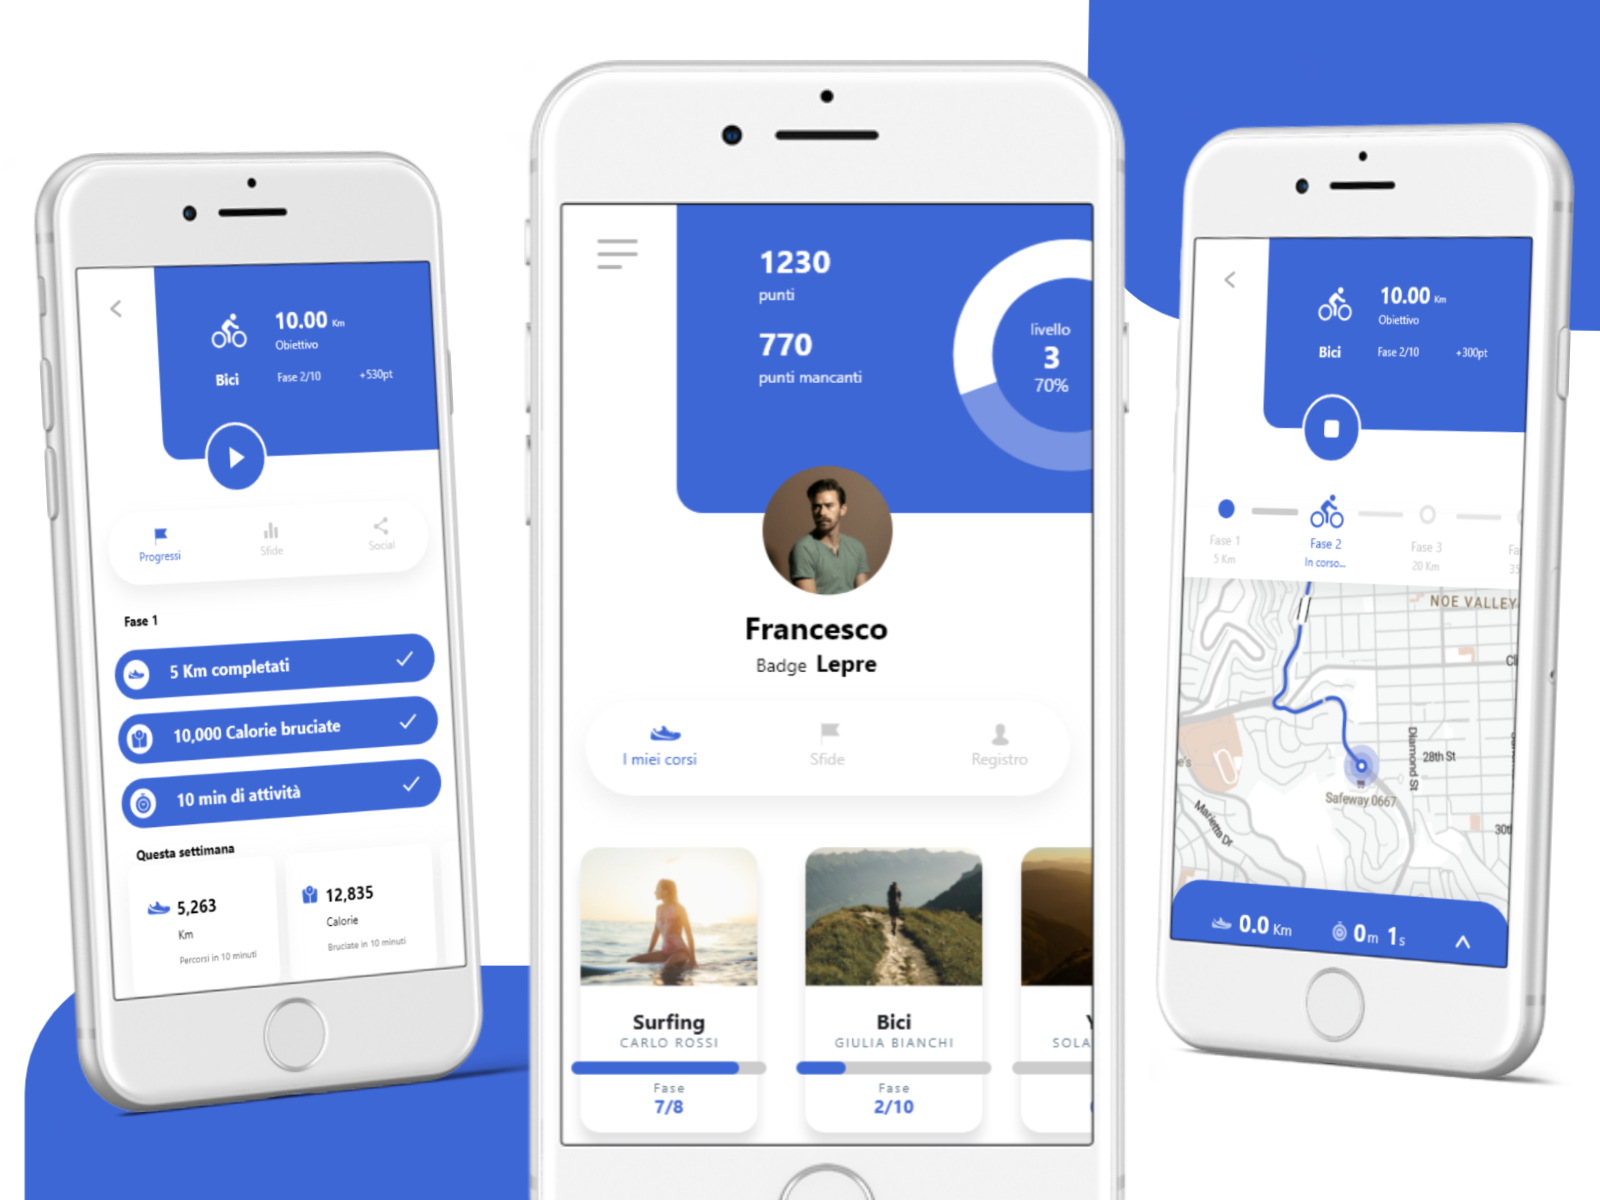 Gamified Fitness Mobile App by Matteo Bruschetti on Dribbble